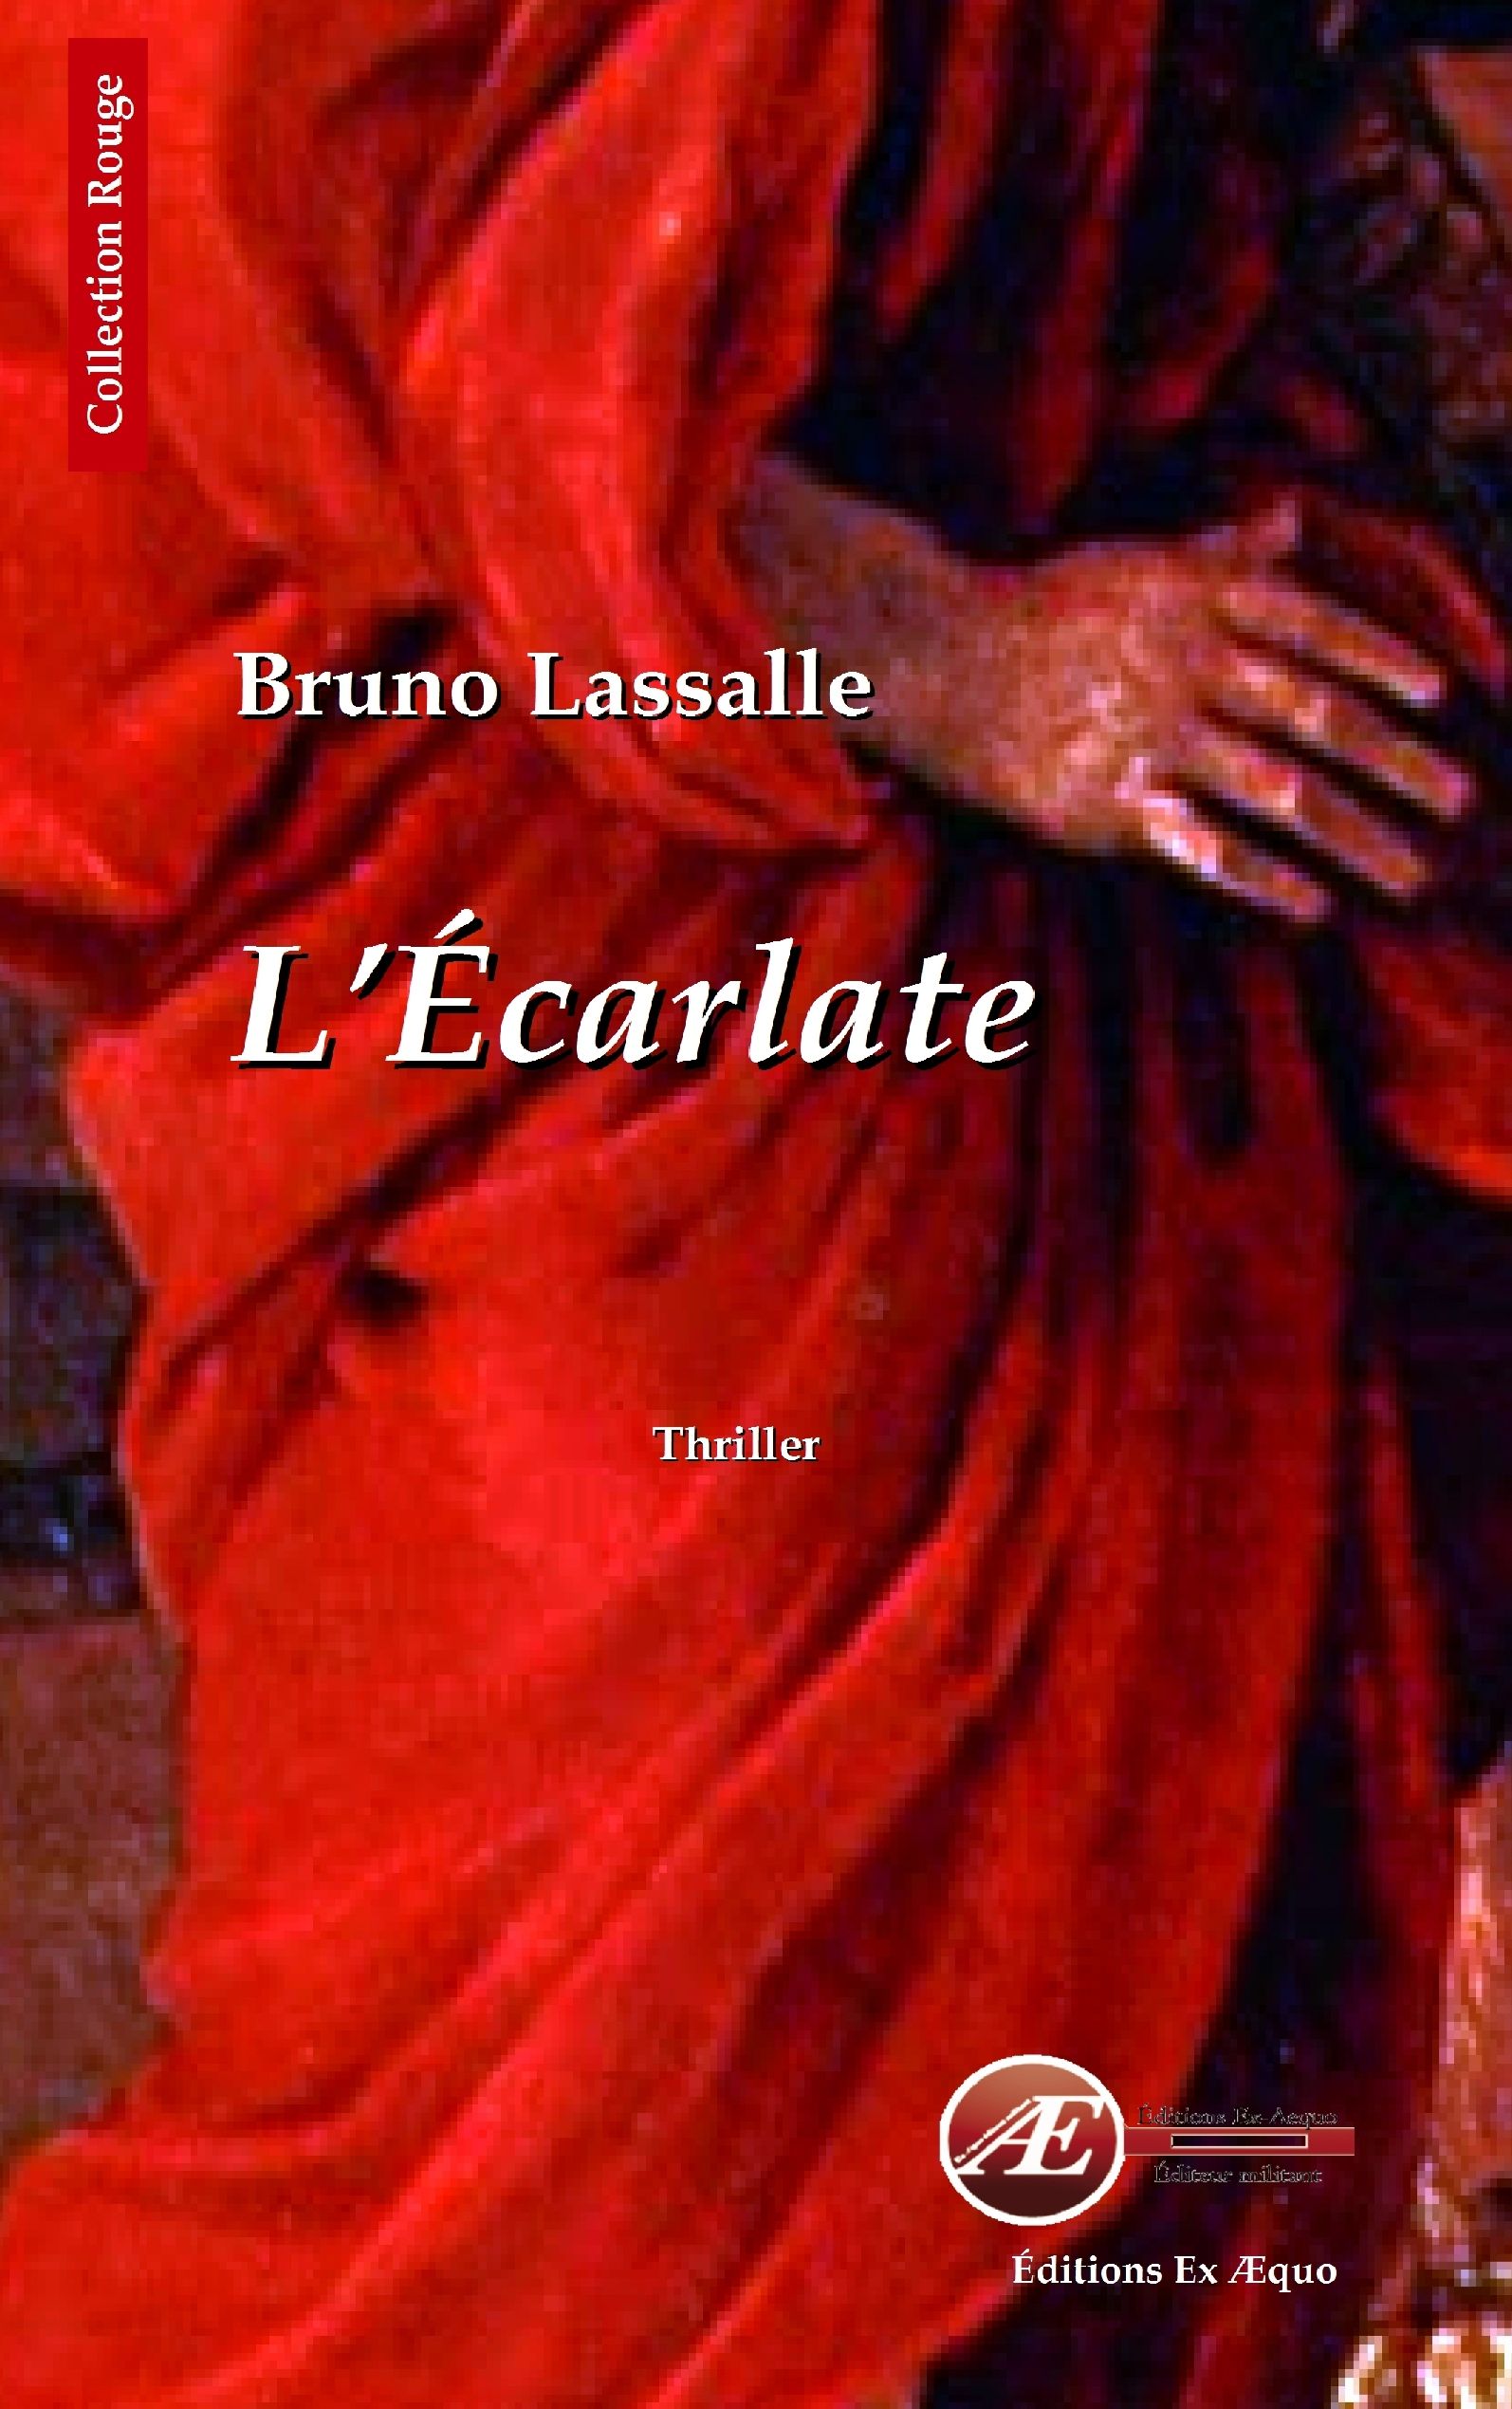 You are currently viewing L’Ecarlate, de Bruno Lassalle